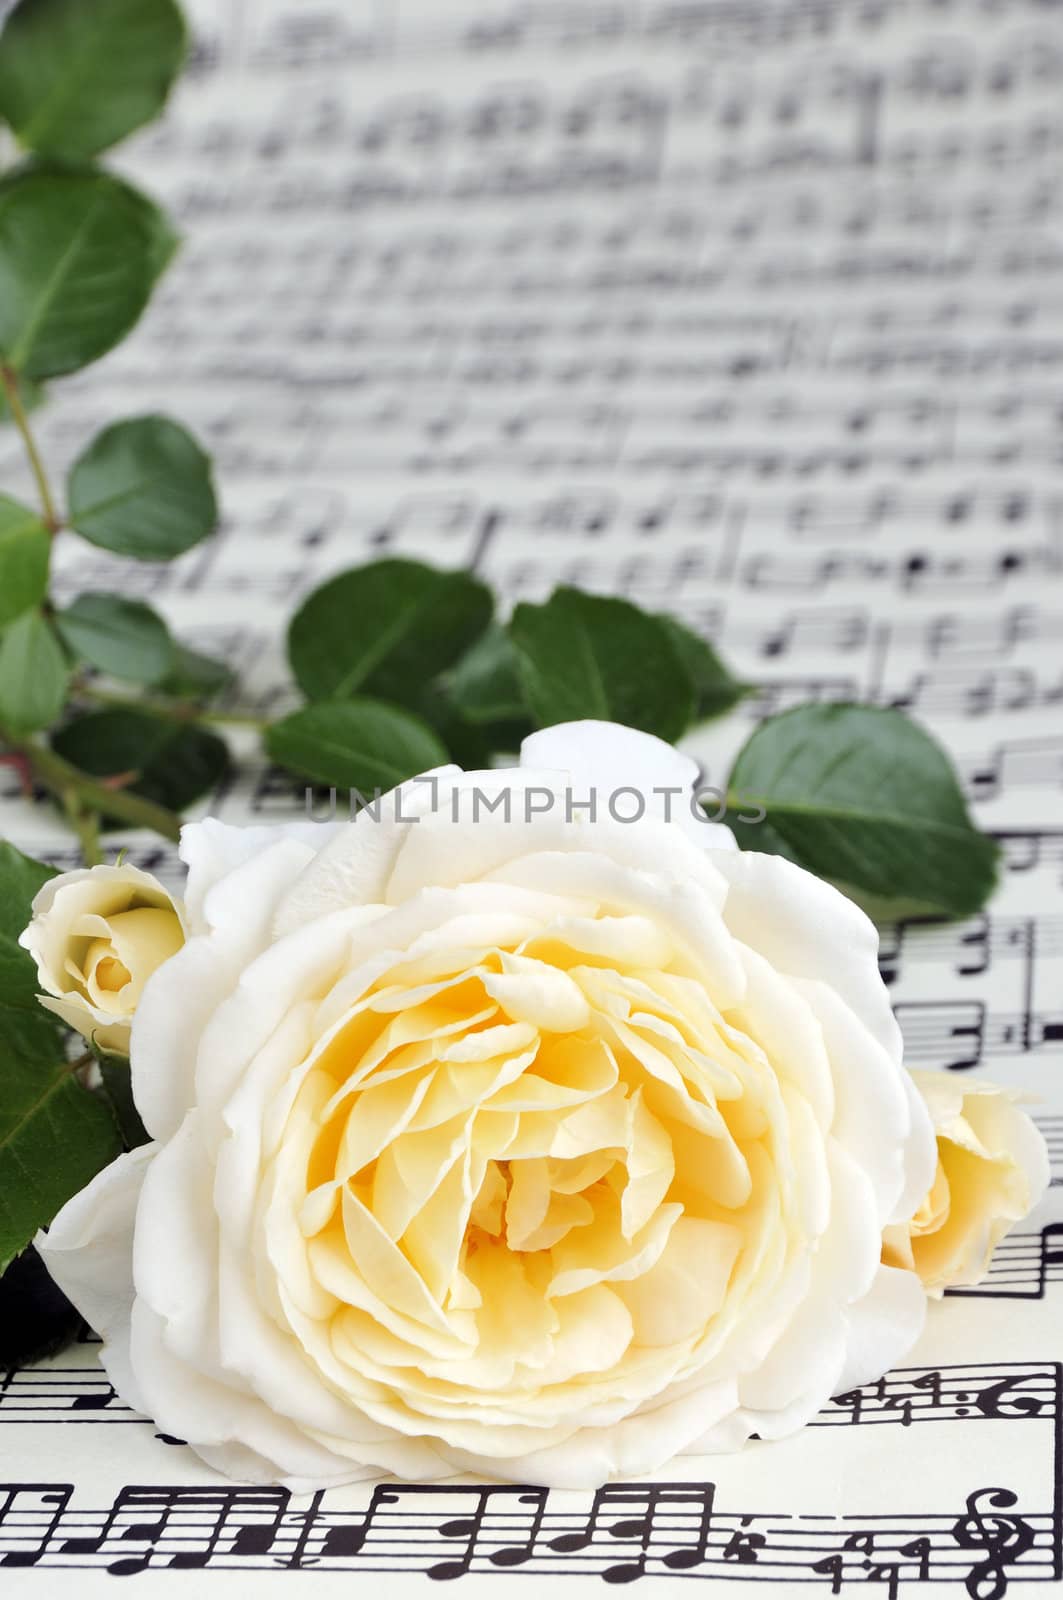 Beautiful white-yellow rose on note paper